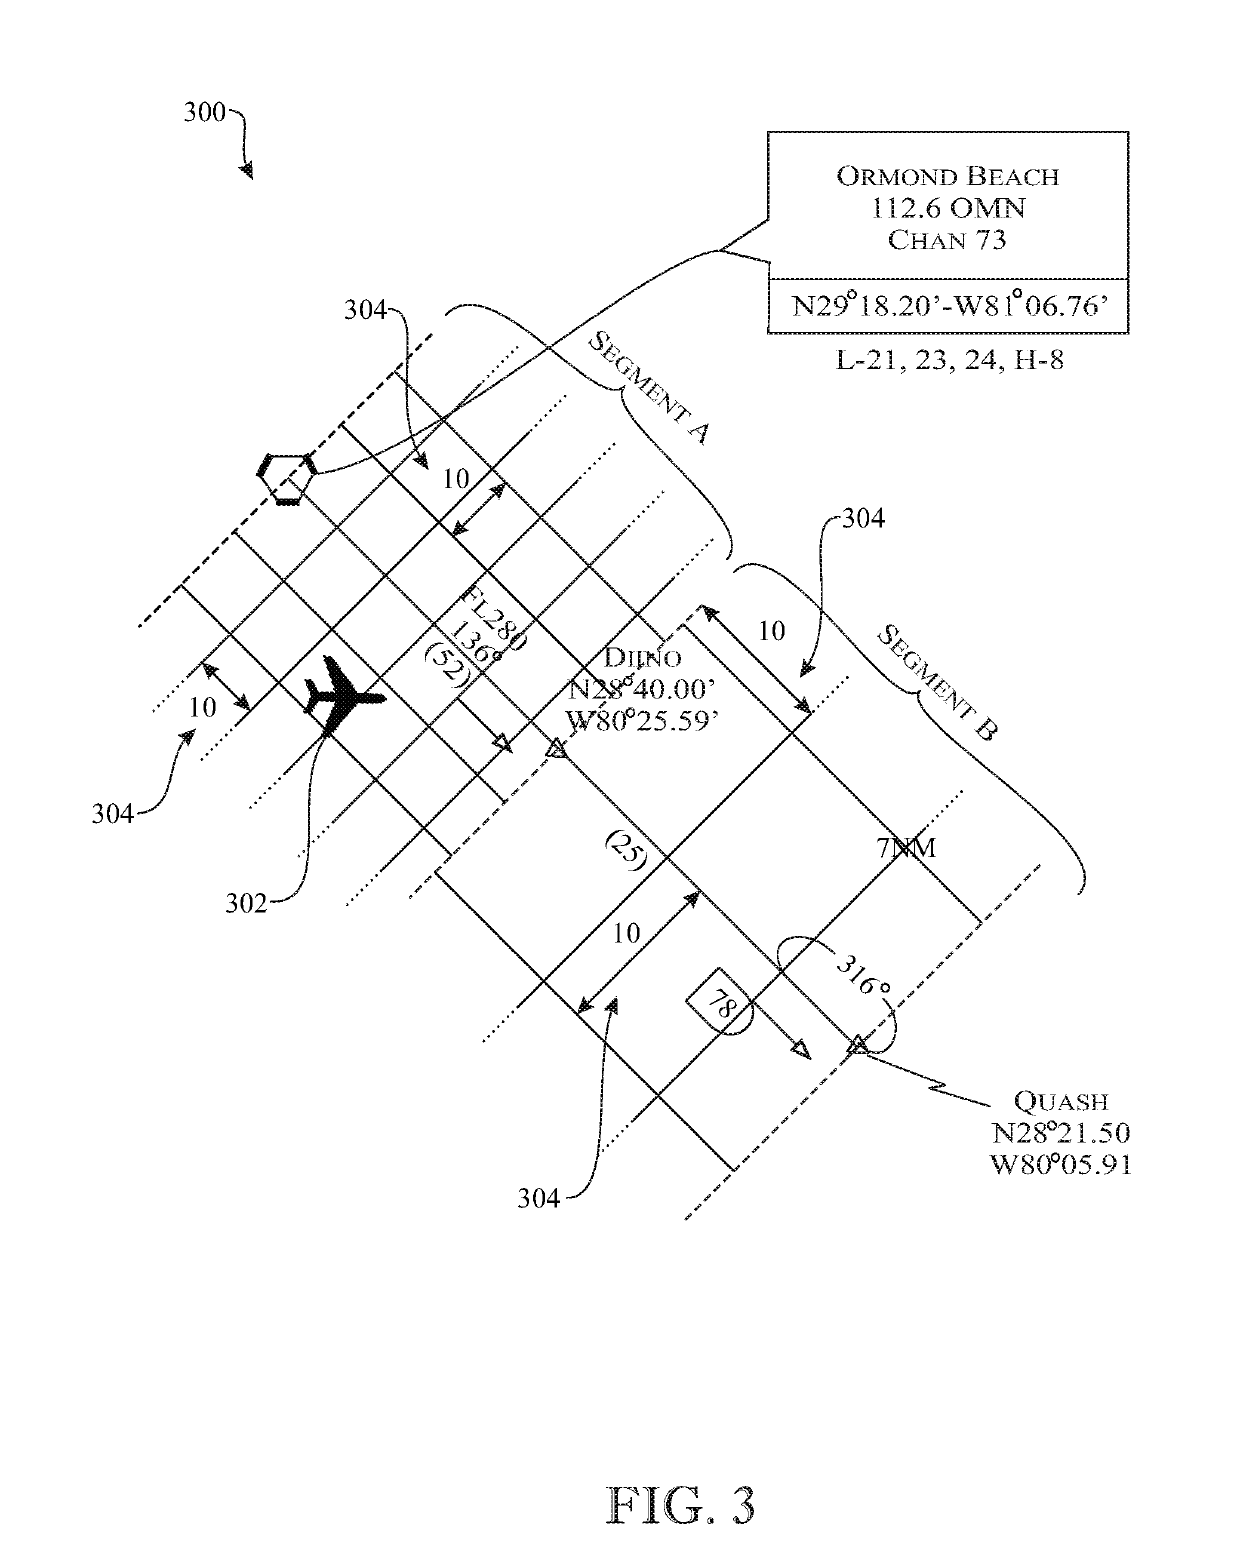 System and method for mapping aircraft position on a non-linear flight procedure chart